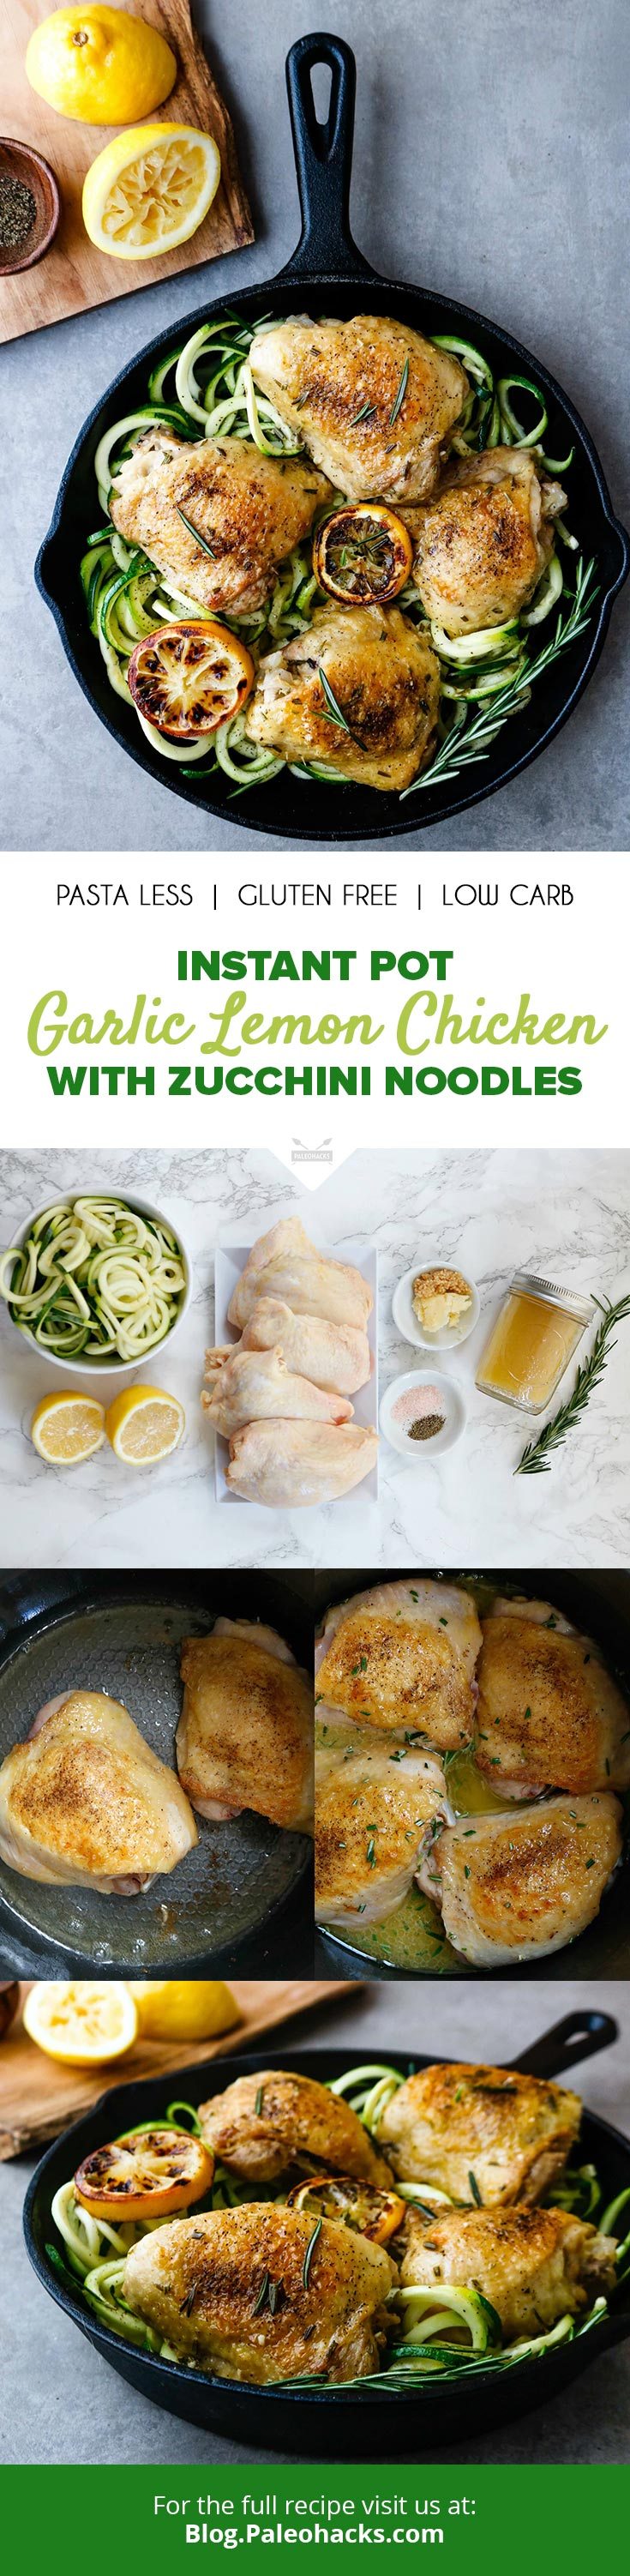 Instant Pot your way to crispy Lemon Garlic Chicken for a protein-packed meal ready in 30 minutes.